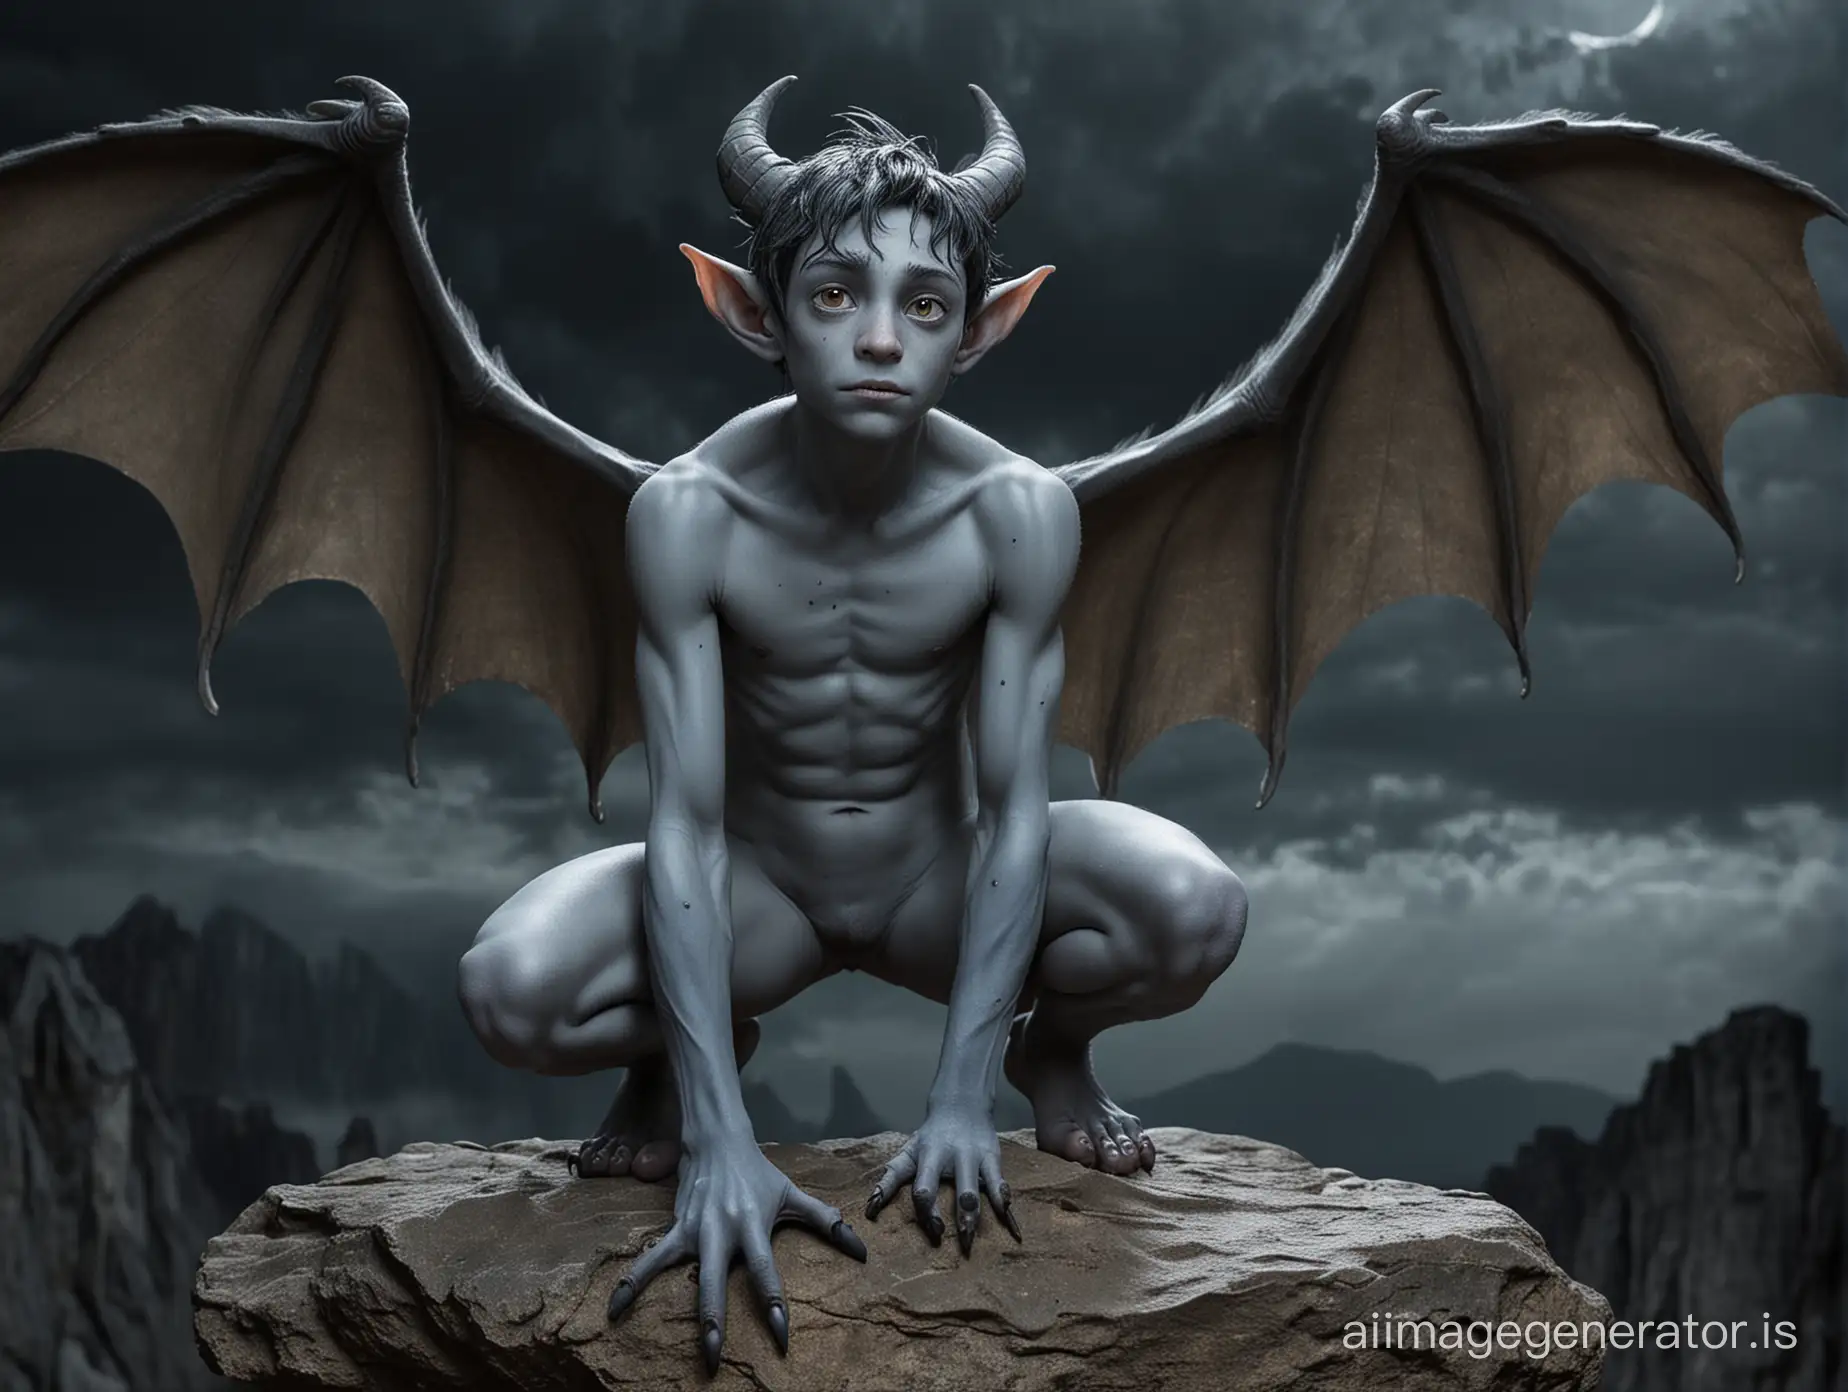 A nude teenage Boy with very smooth gray-blue skin and some freckles. He has bat-like wings and a Tail. He is skinny. He has pointet ears. He has dark hair. He has claws instead of fingers and toes. Two natural small horns without any structure growing from his forehead. He stands on a Rock in a dark cloudy Night like a Gargoyle. Show the entire boy in a long shot.